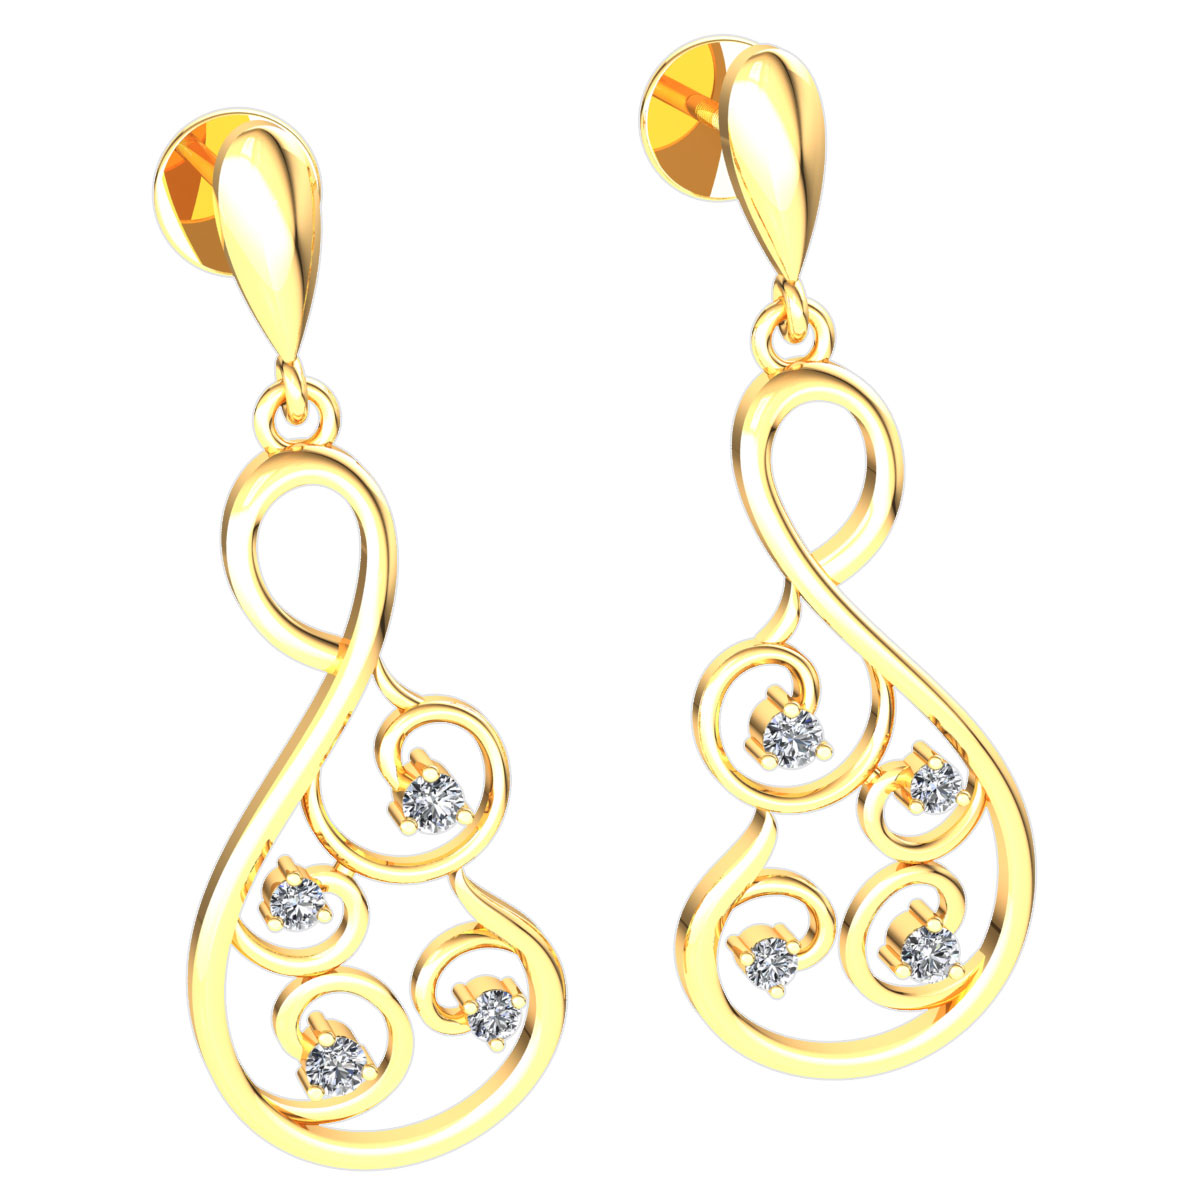 Jewel We Sell Genuine 0.1ctw Round Cut Diamond Ladies Infinity Designer Earrings Solid 14K White, Yellow or Rose Gold GH I1